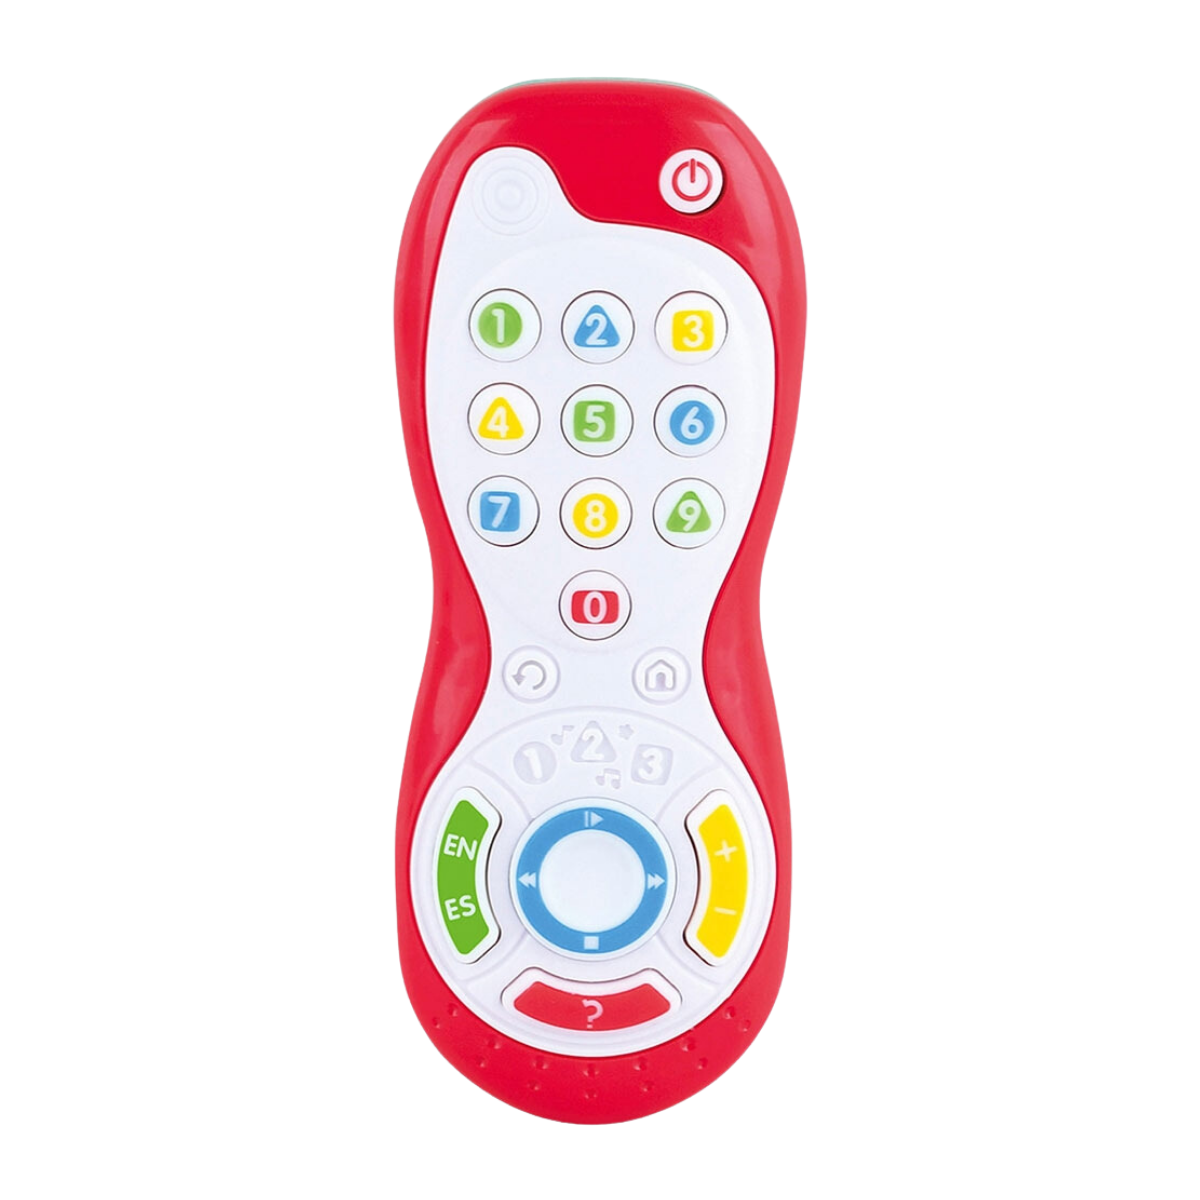 Curious Learner Remote